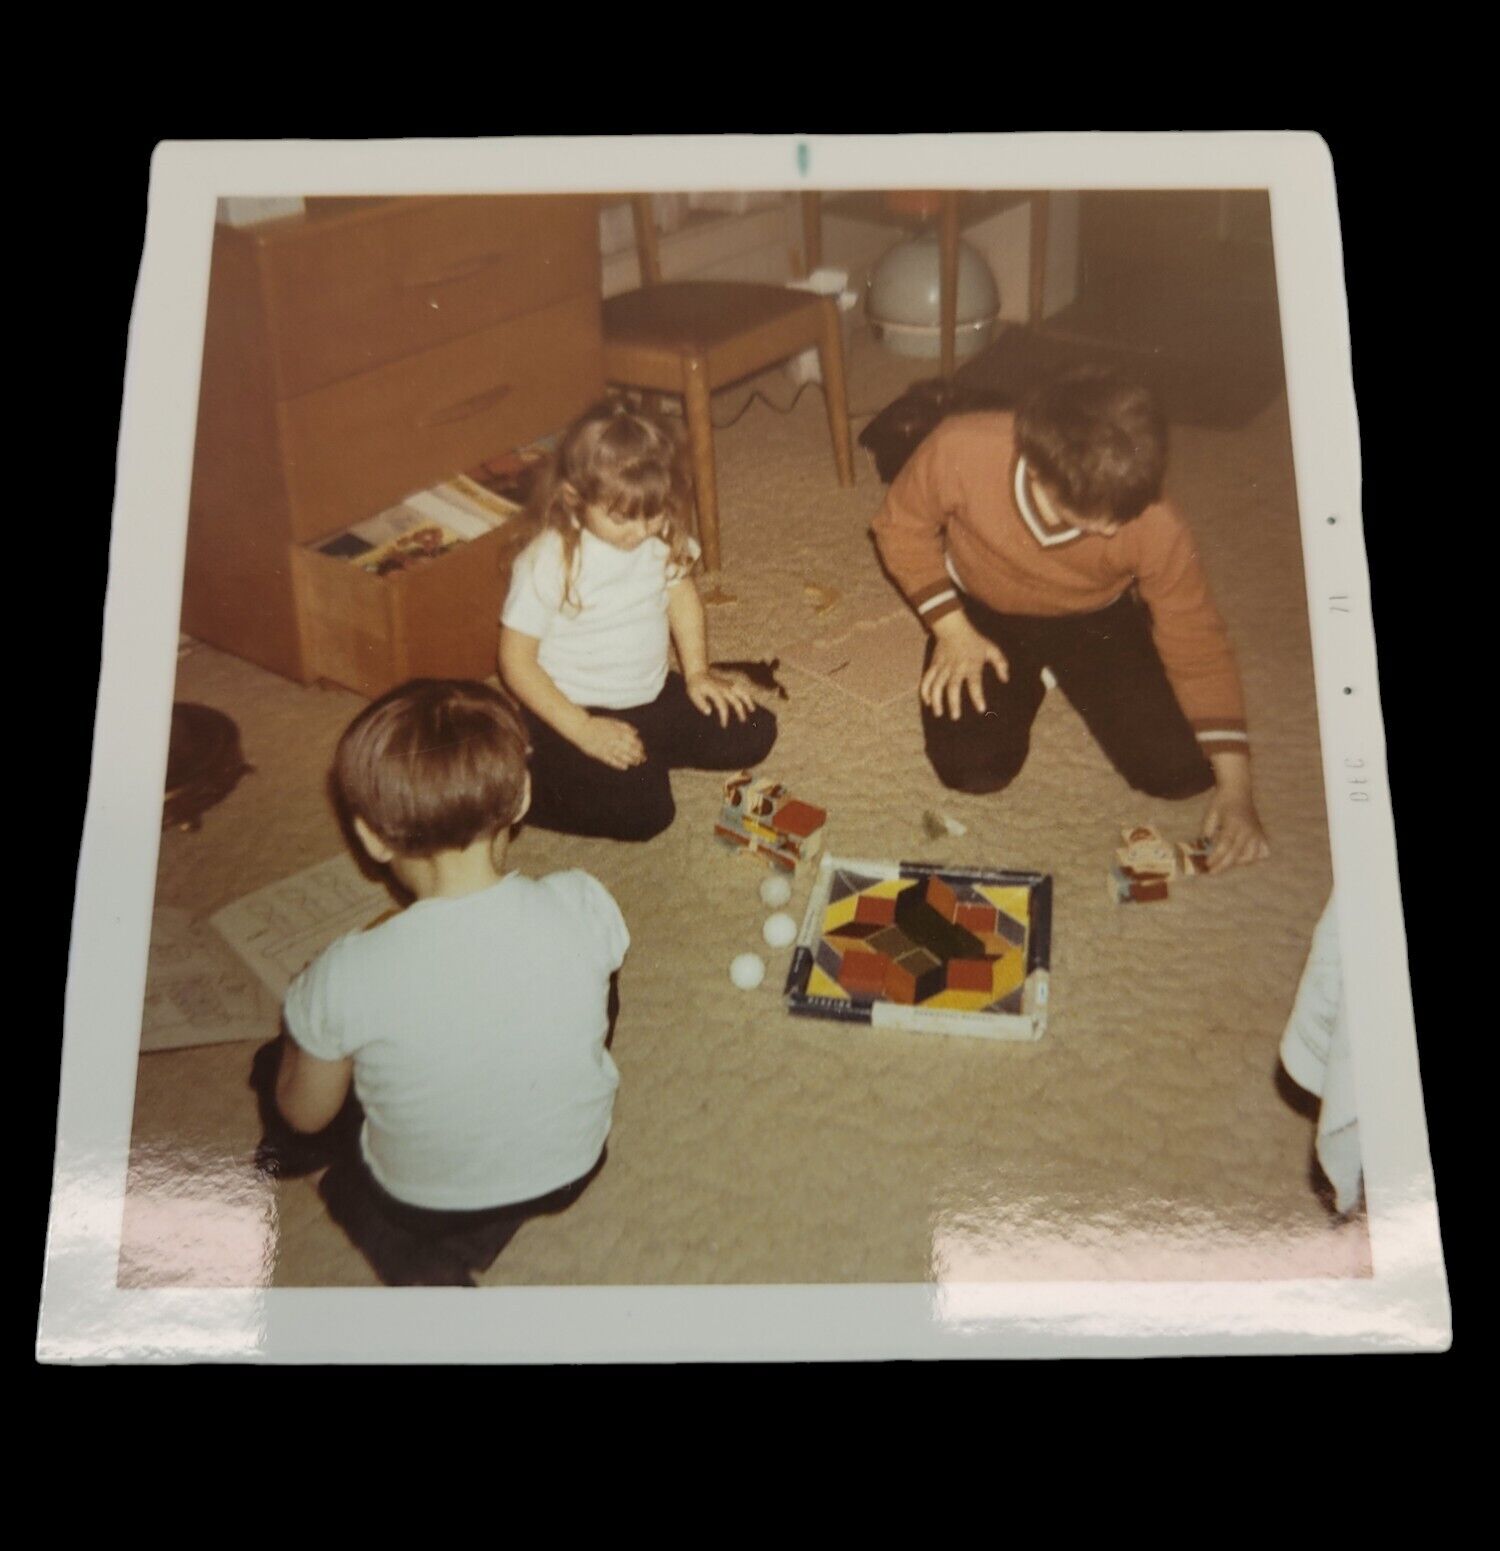 1970s Photo Color Vintage Snapshot Children play with toys Puzzle Wooden Blocks